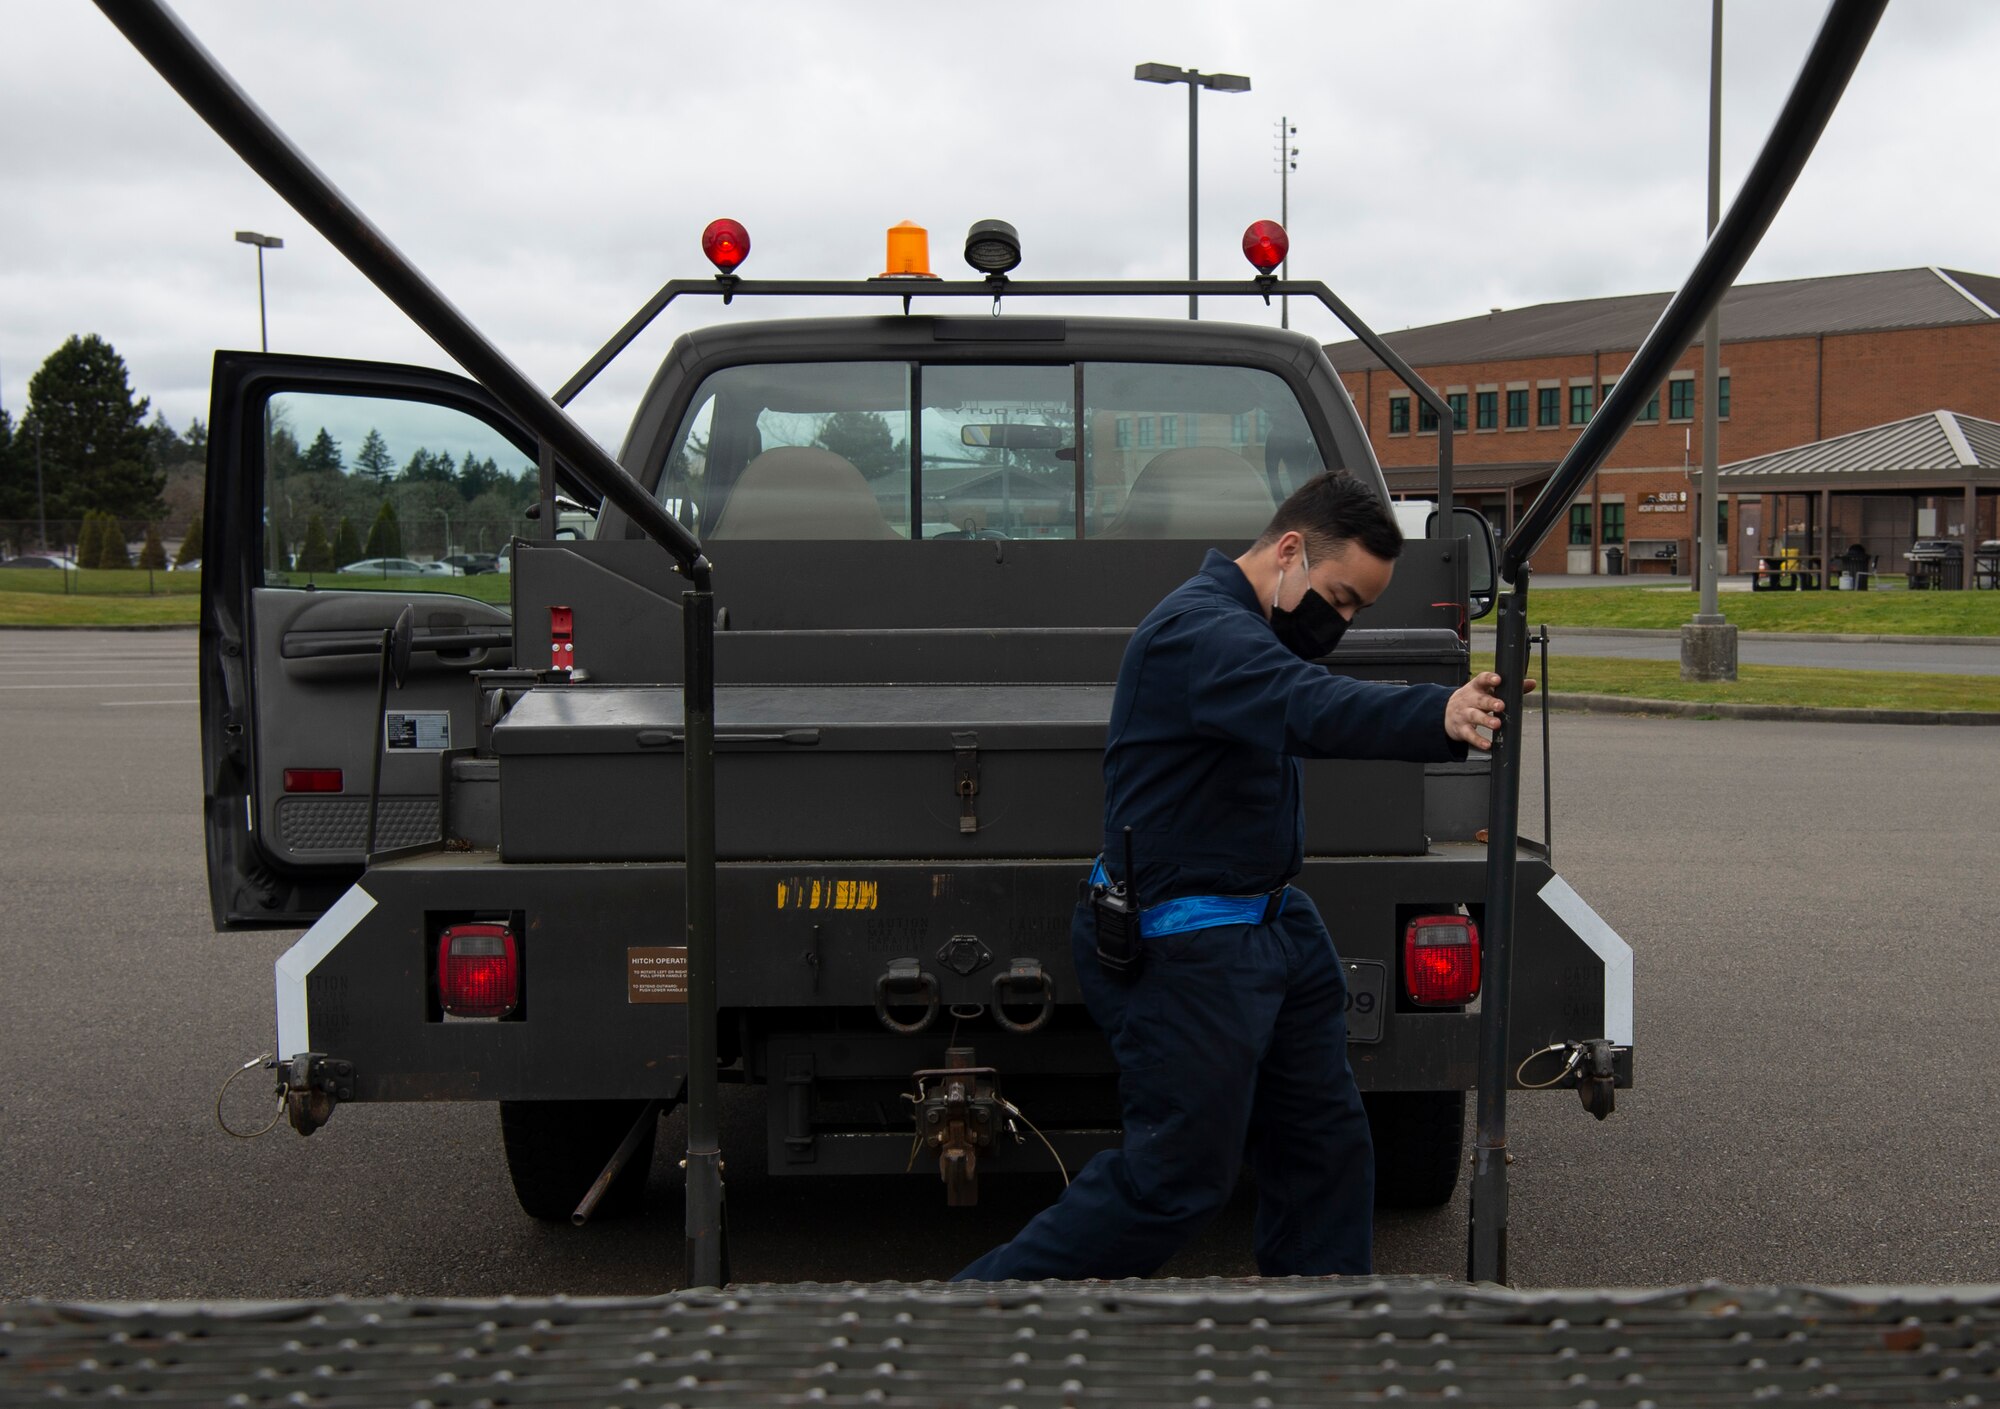 U.S. Air Force Airman 1st Class Sean Gilbert, 62nd Maintenance Squadron Aerospace Ground Equipment Flight apprentice, removes the brakes on a stand to hook it to his vehicle at Joint Base Lewis-McChord, Washington, April 7, 2021. Gilbert delivers equipment to the flightline to be used in the inspection and repair of C-17 Globemaster IIIs at McChord Field. (U.S. Air Force photo by Senior Airman Tryphena Mayhugh)